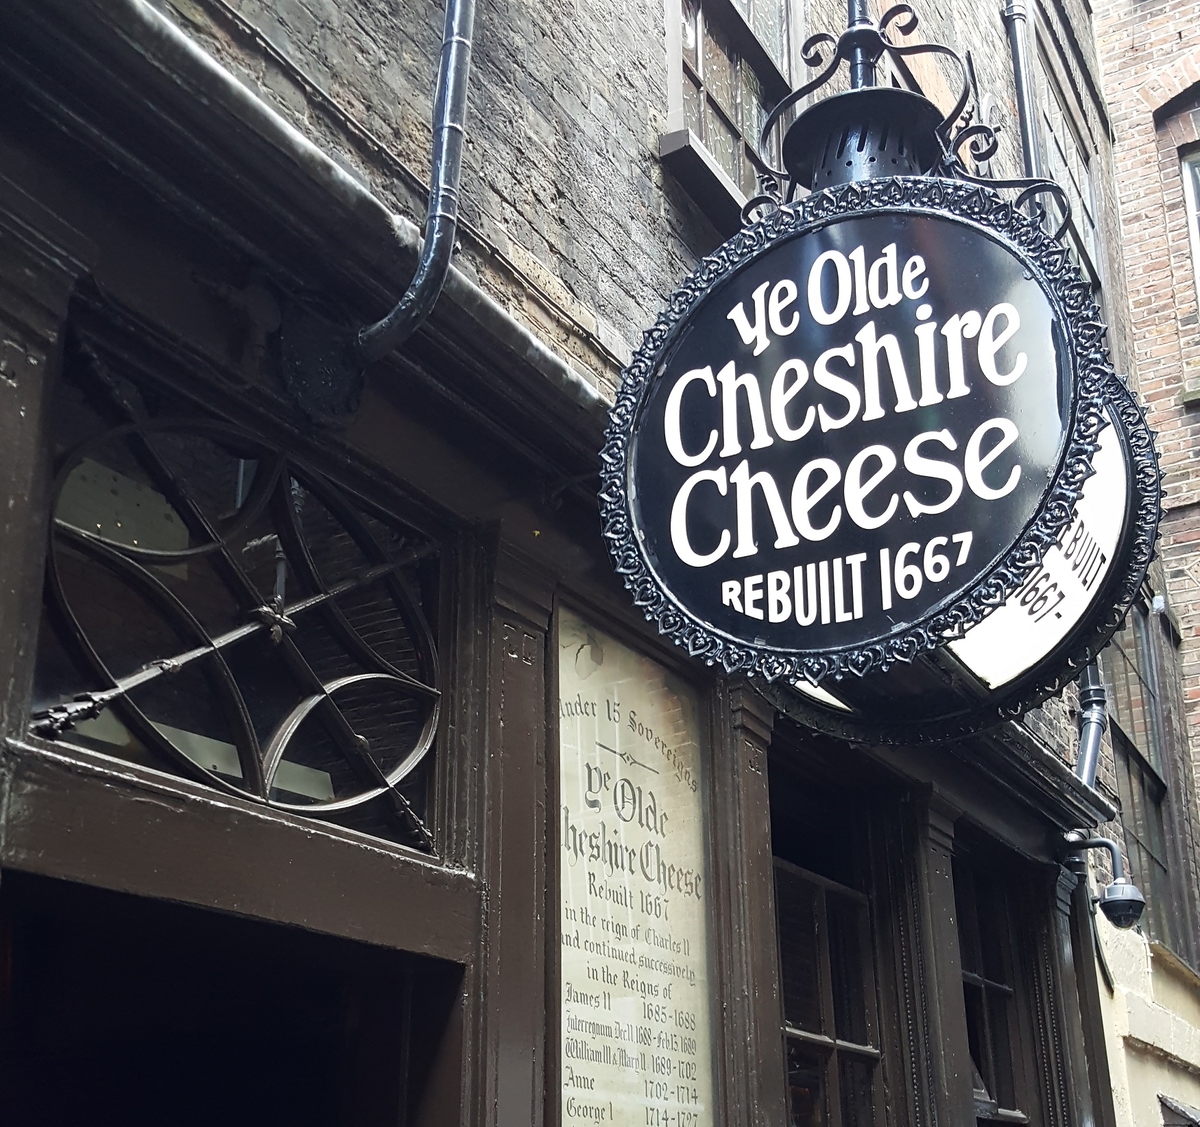 ye olde cheshire cheese street sign in front of entrance